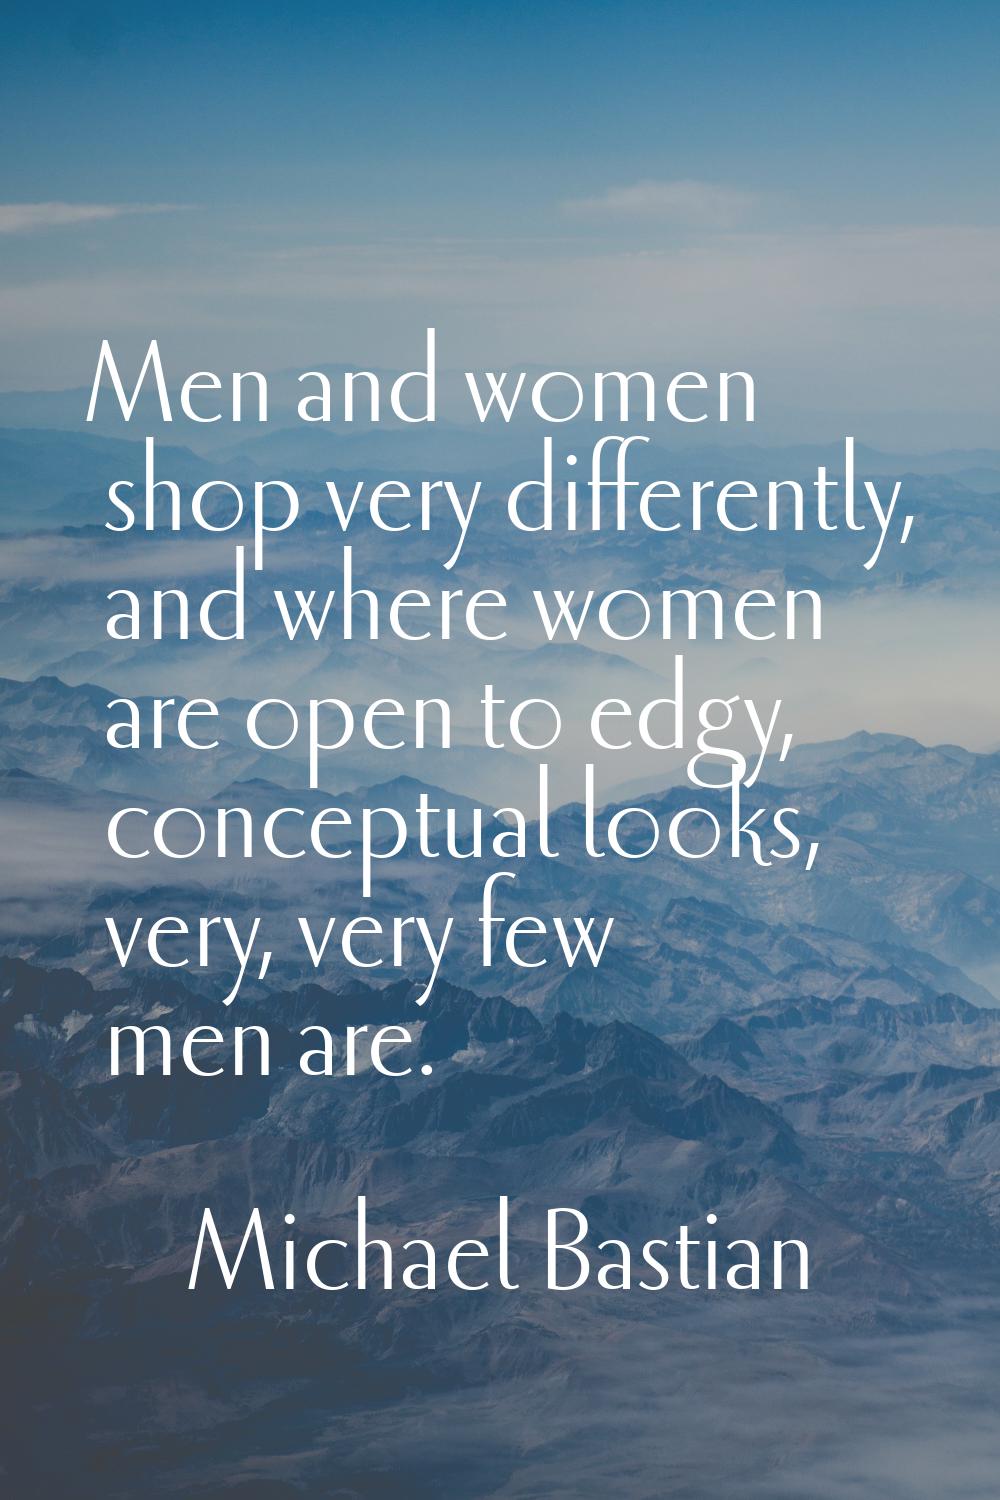 Men and women shop very differently, and where women are open to edgy, conceptual looks, very, very